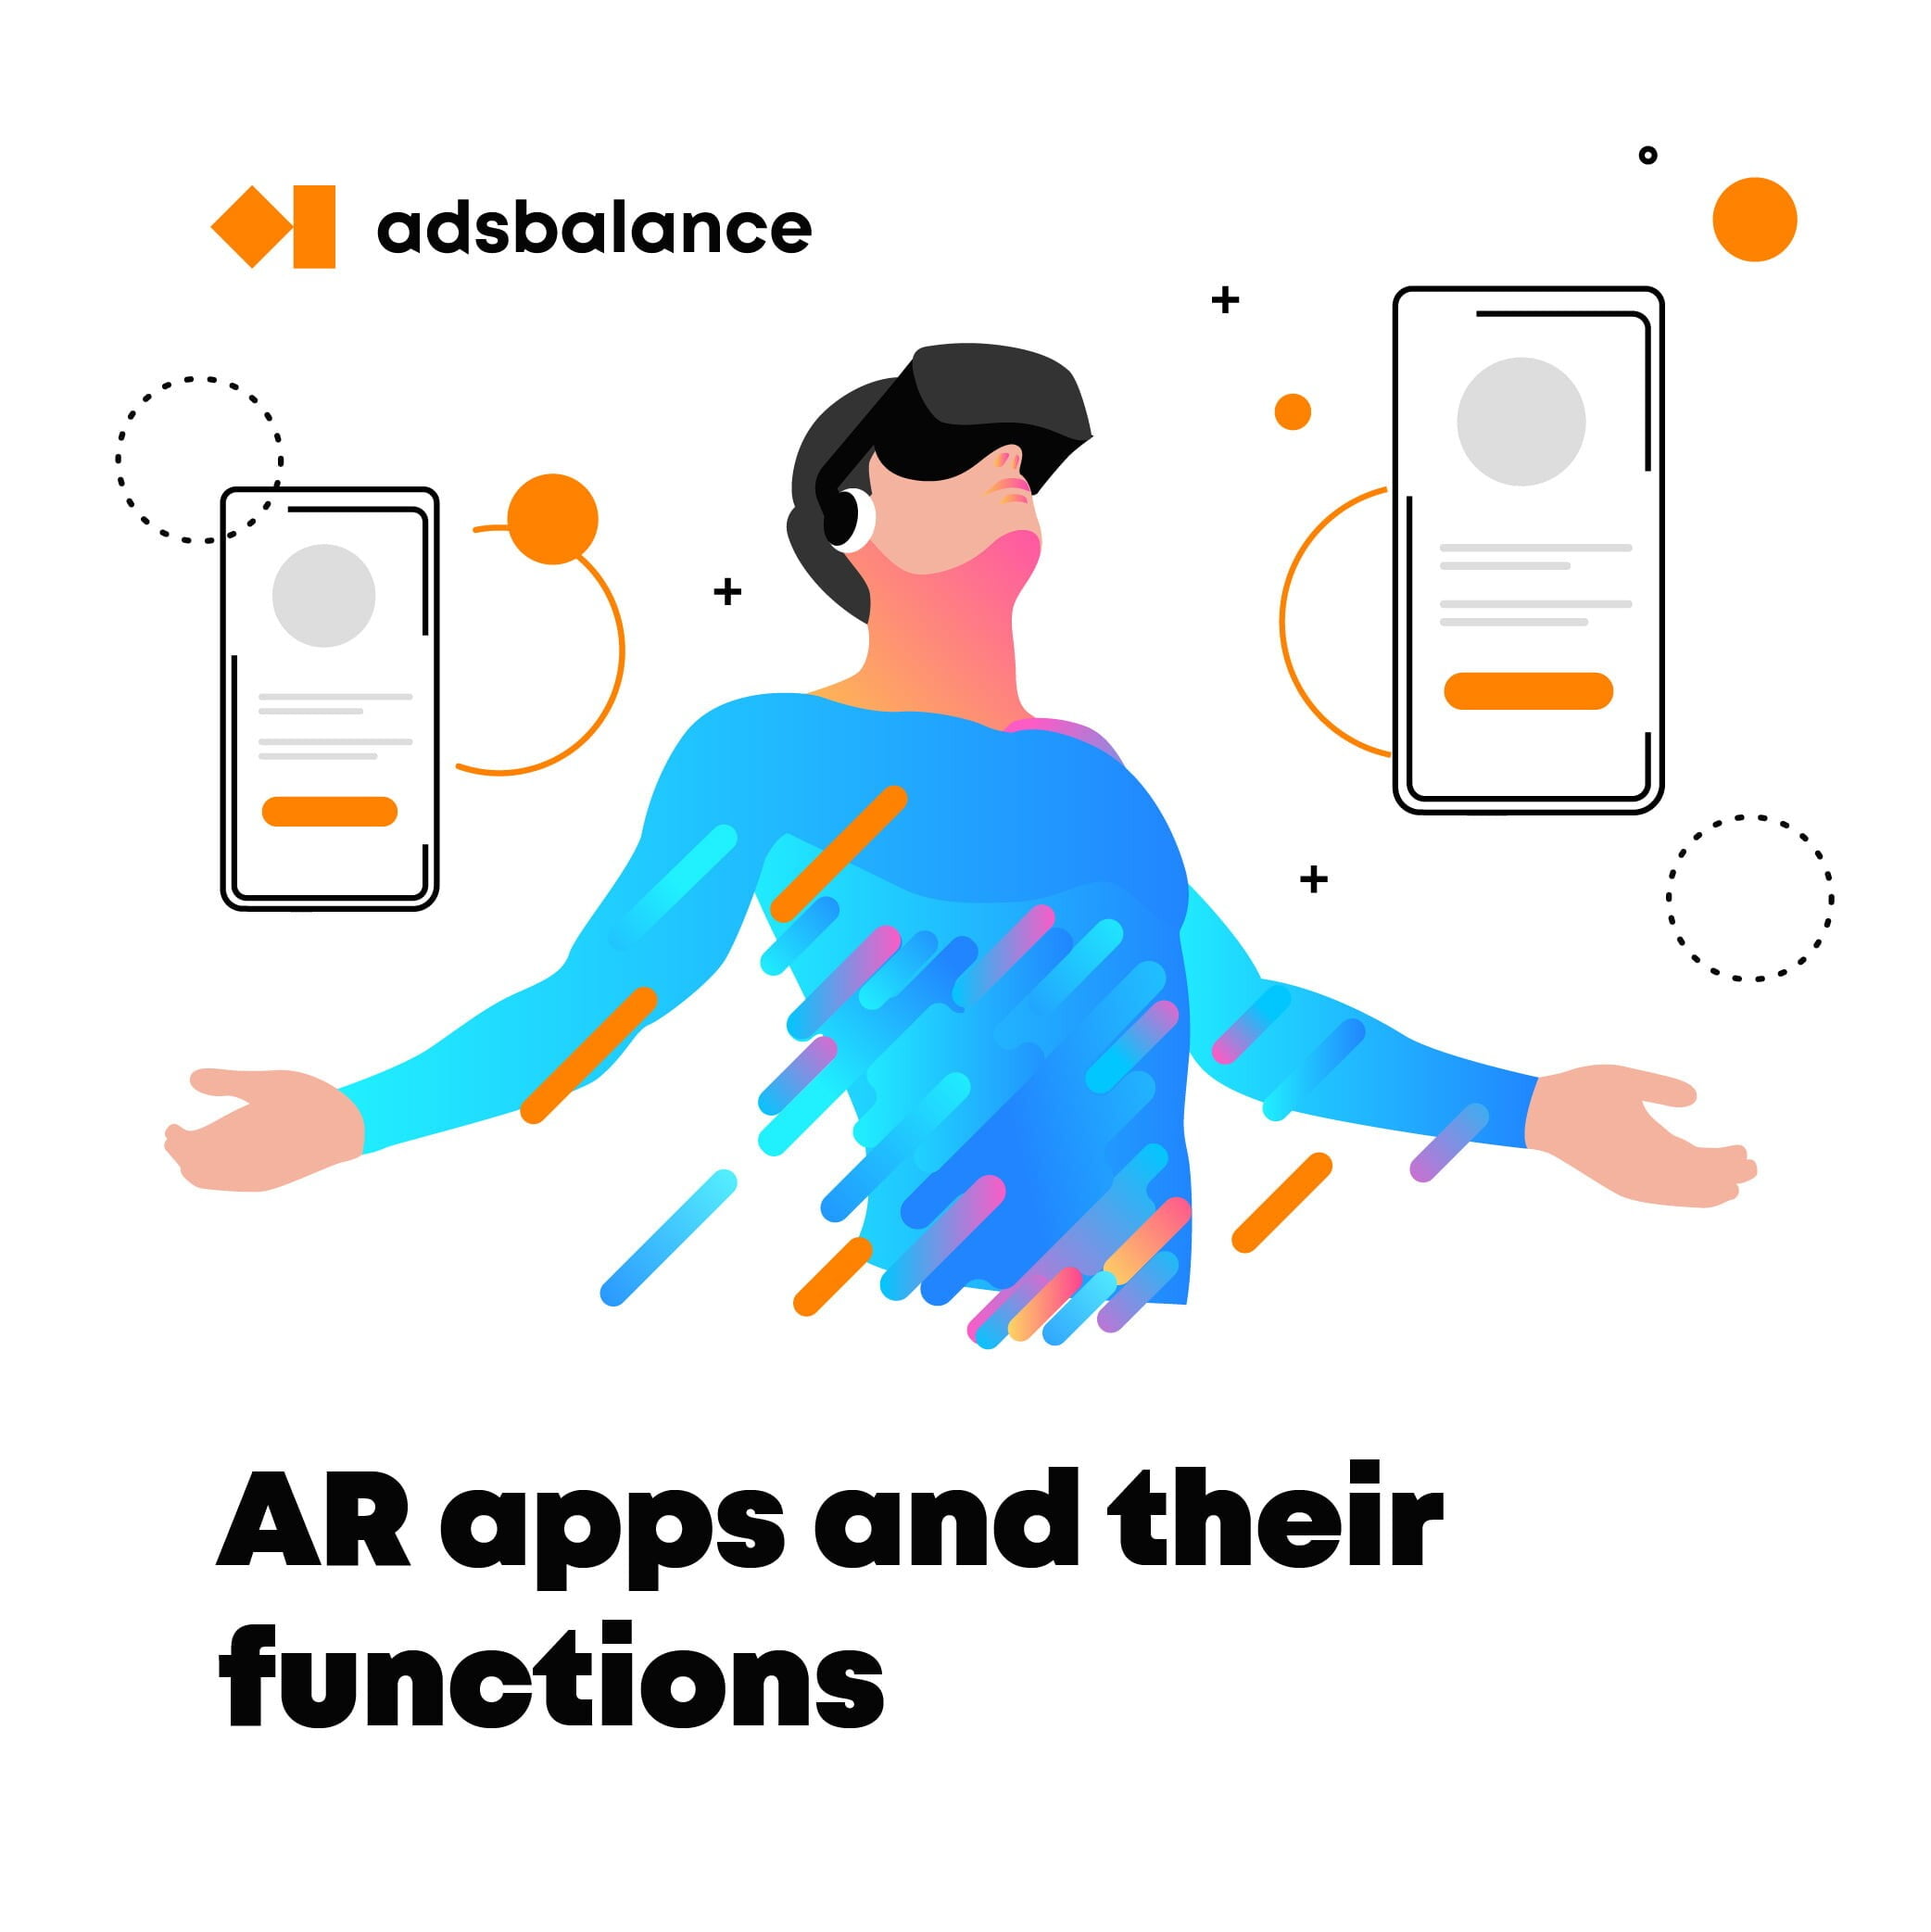 AR apps and their functions. How do AR apps work?